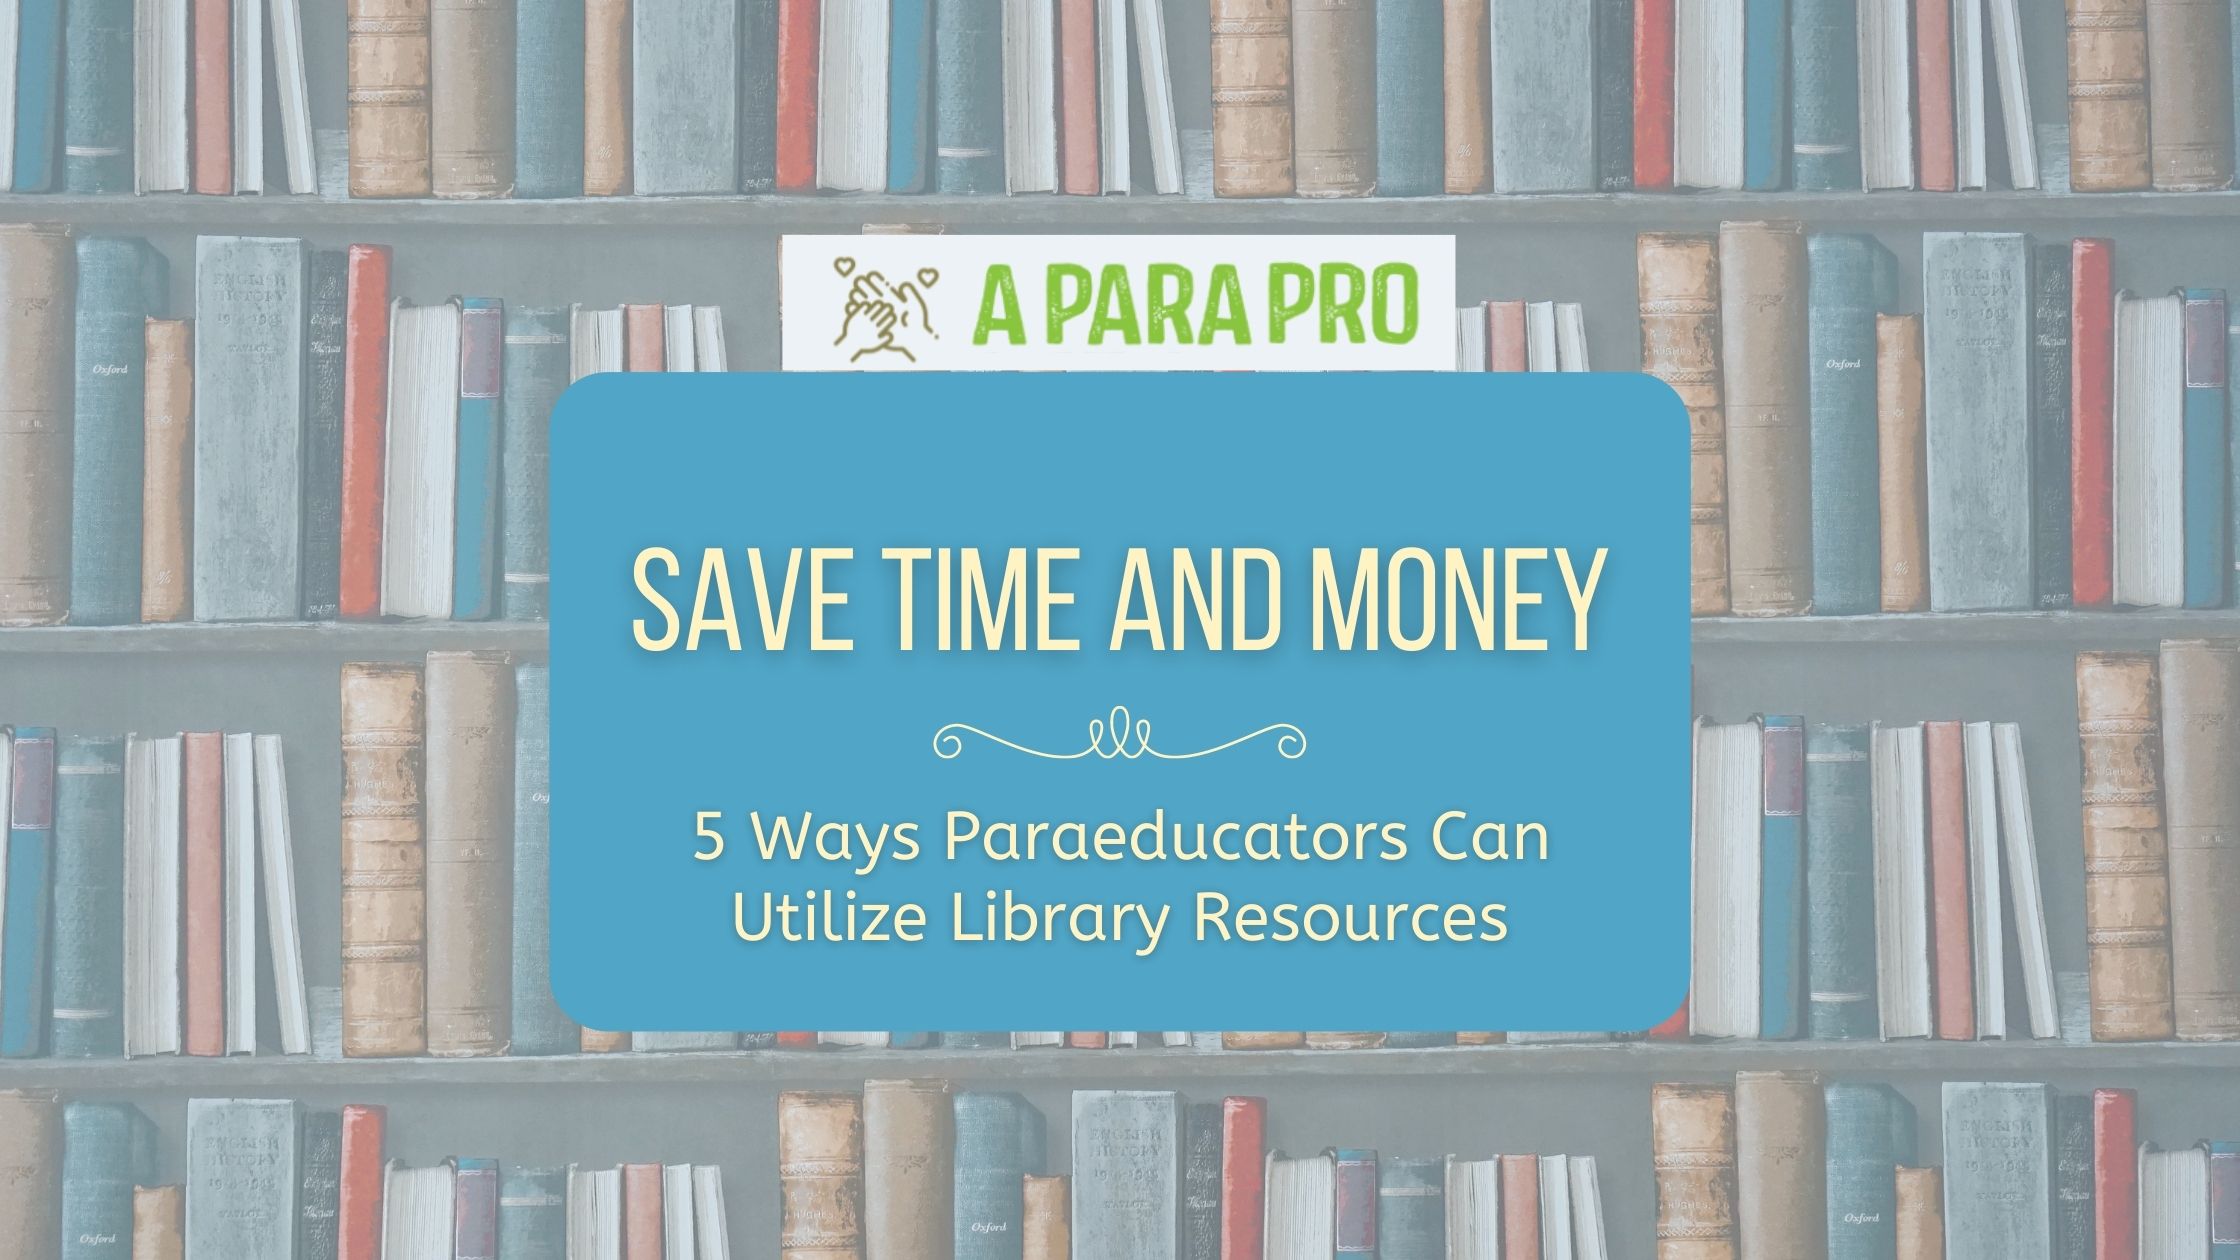 library resources- a para pro featured image